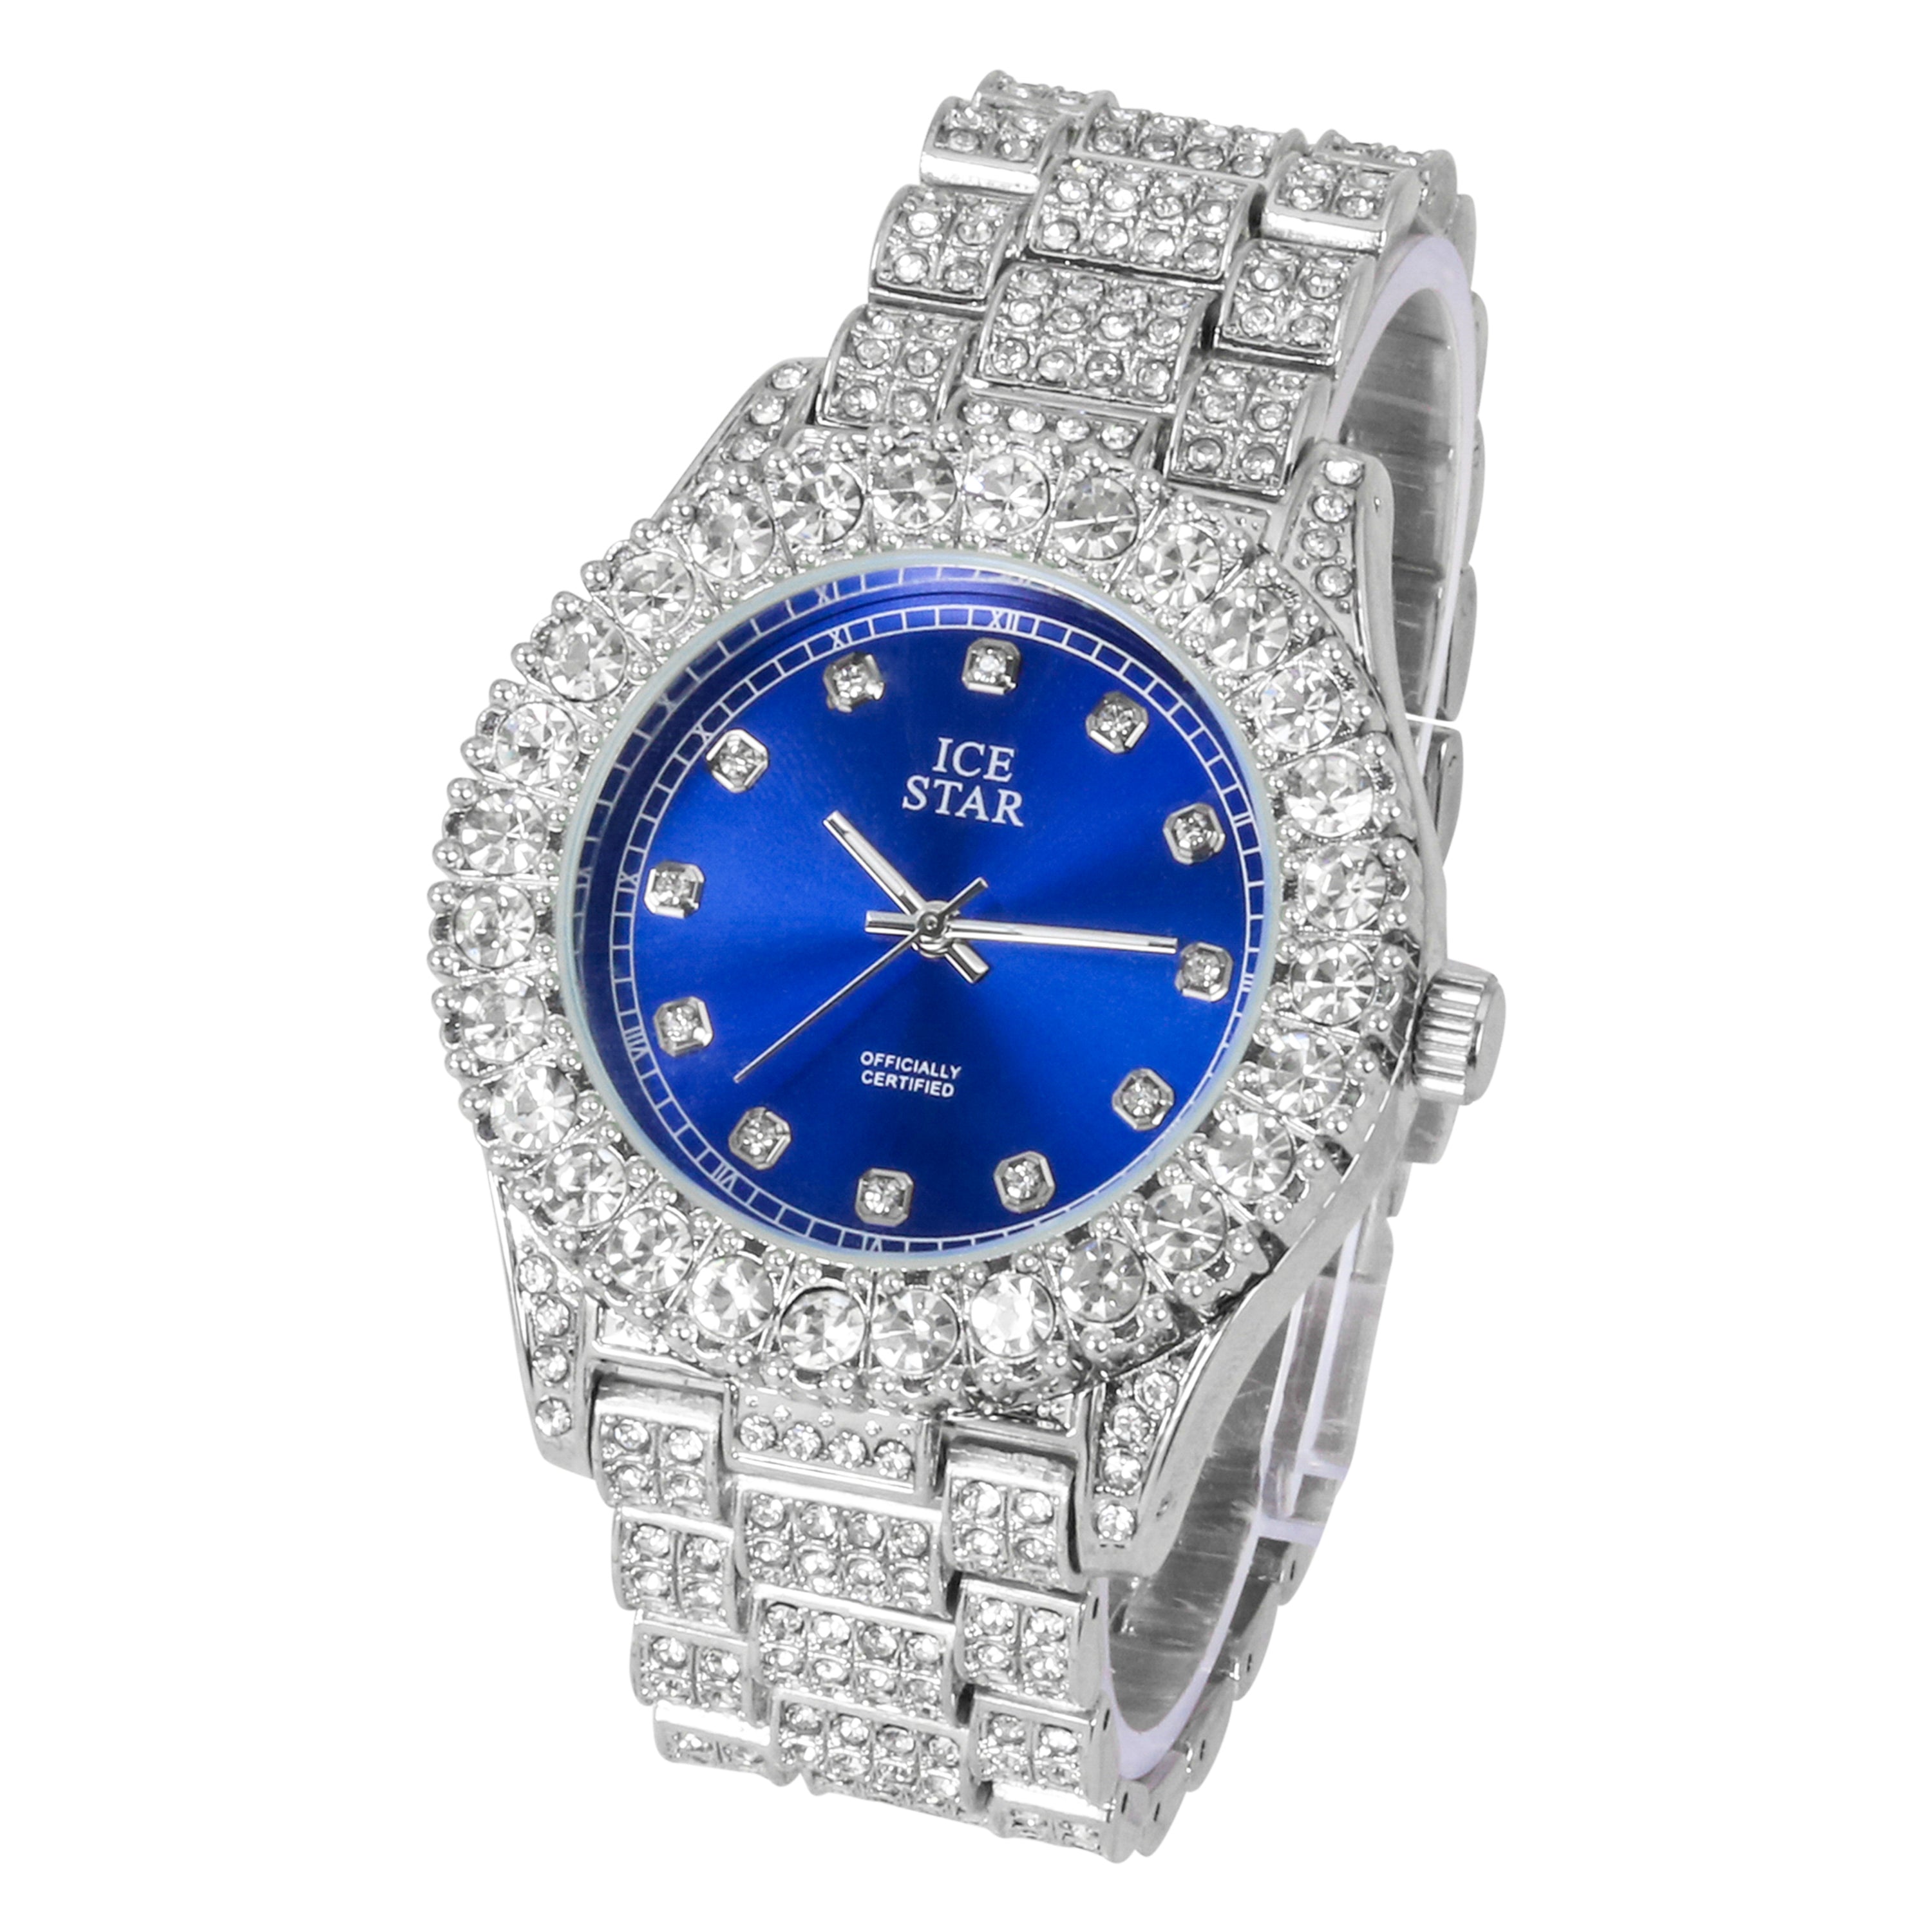 Men's Round Iced Out Watch 44mm Silver